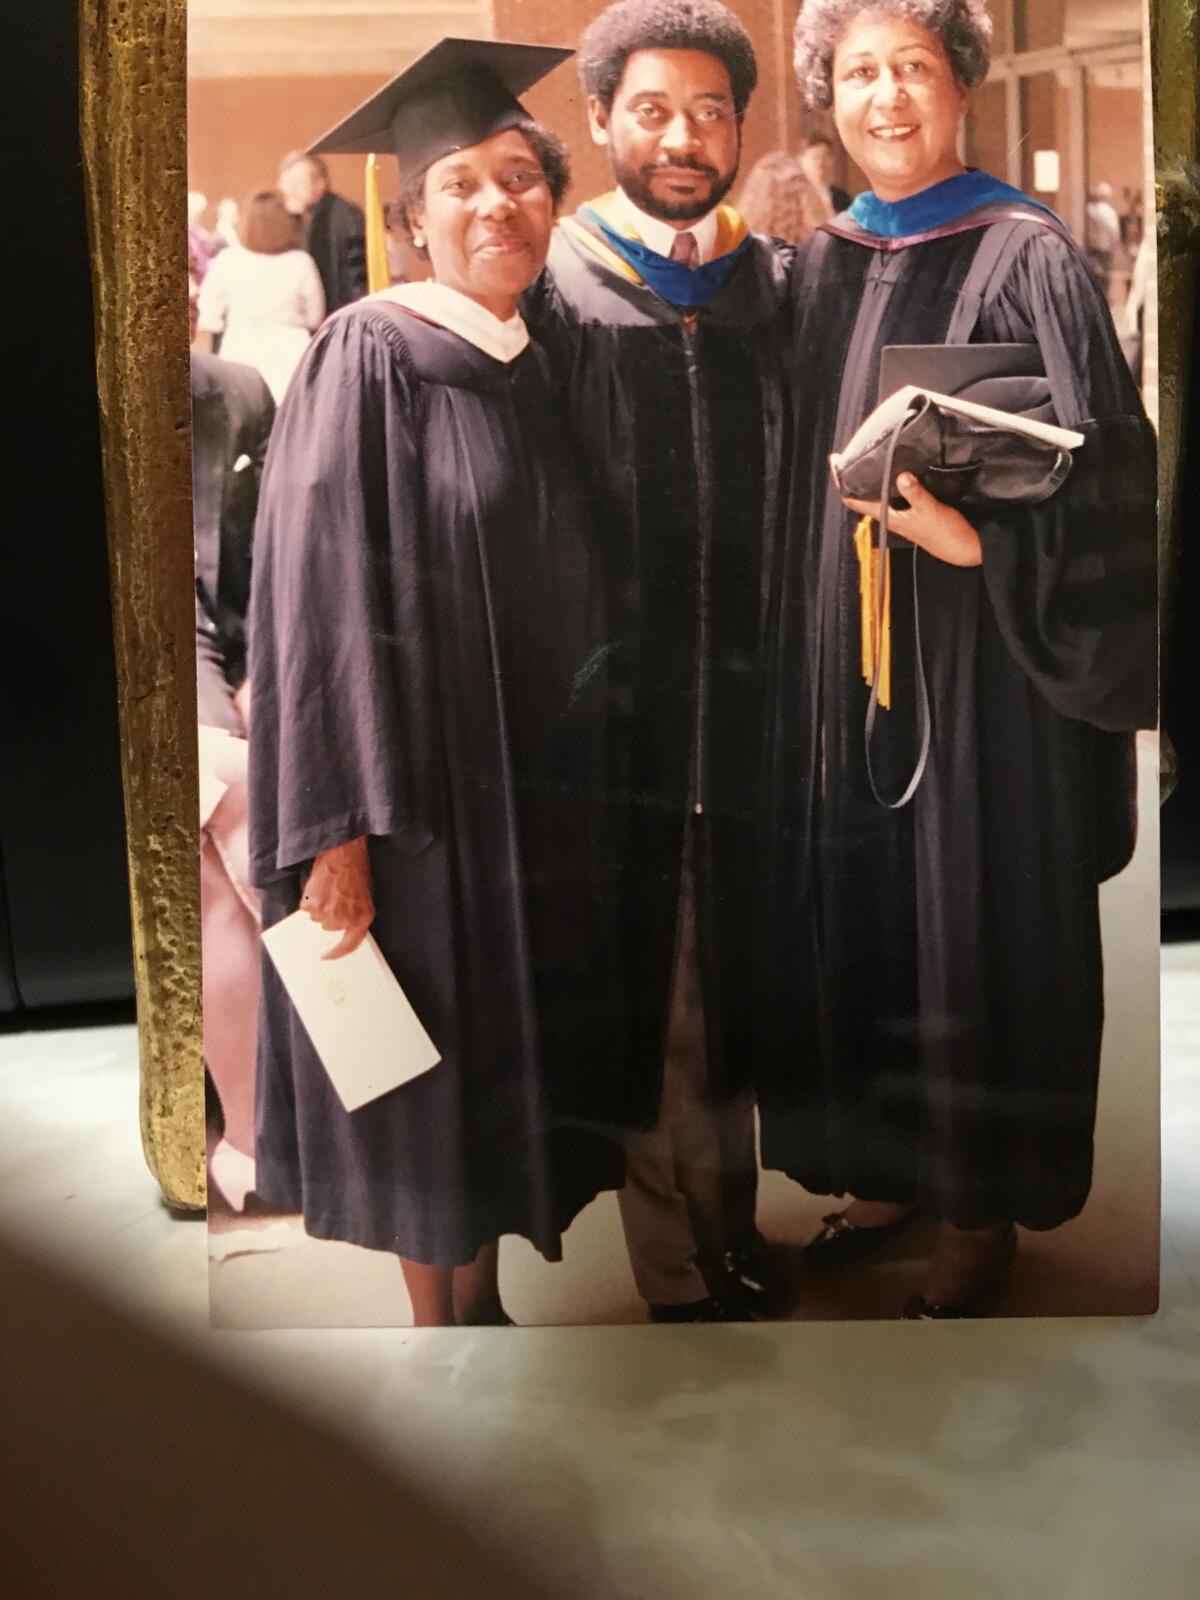 Three people in graduation gowns standing next to each other. 